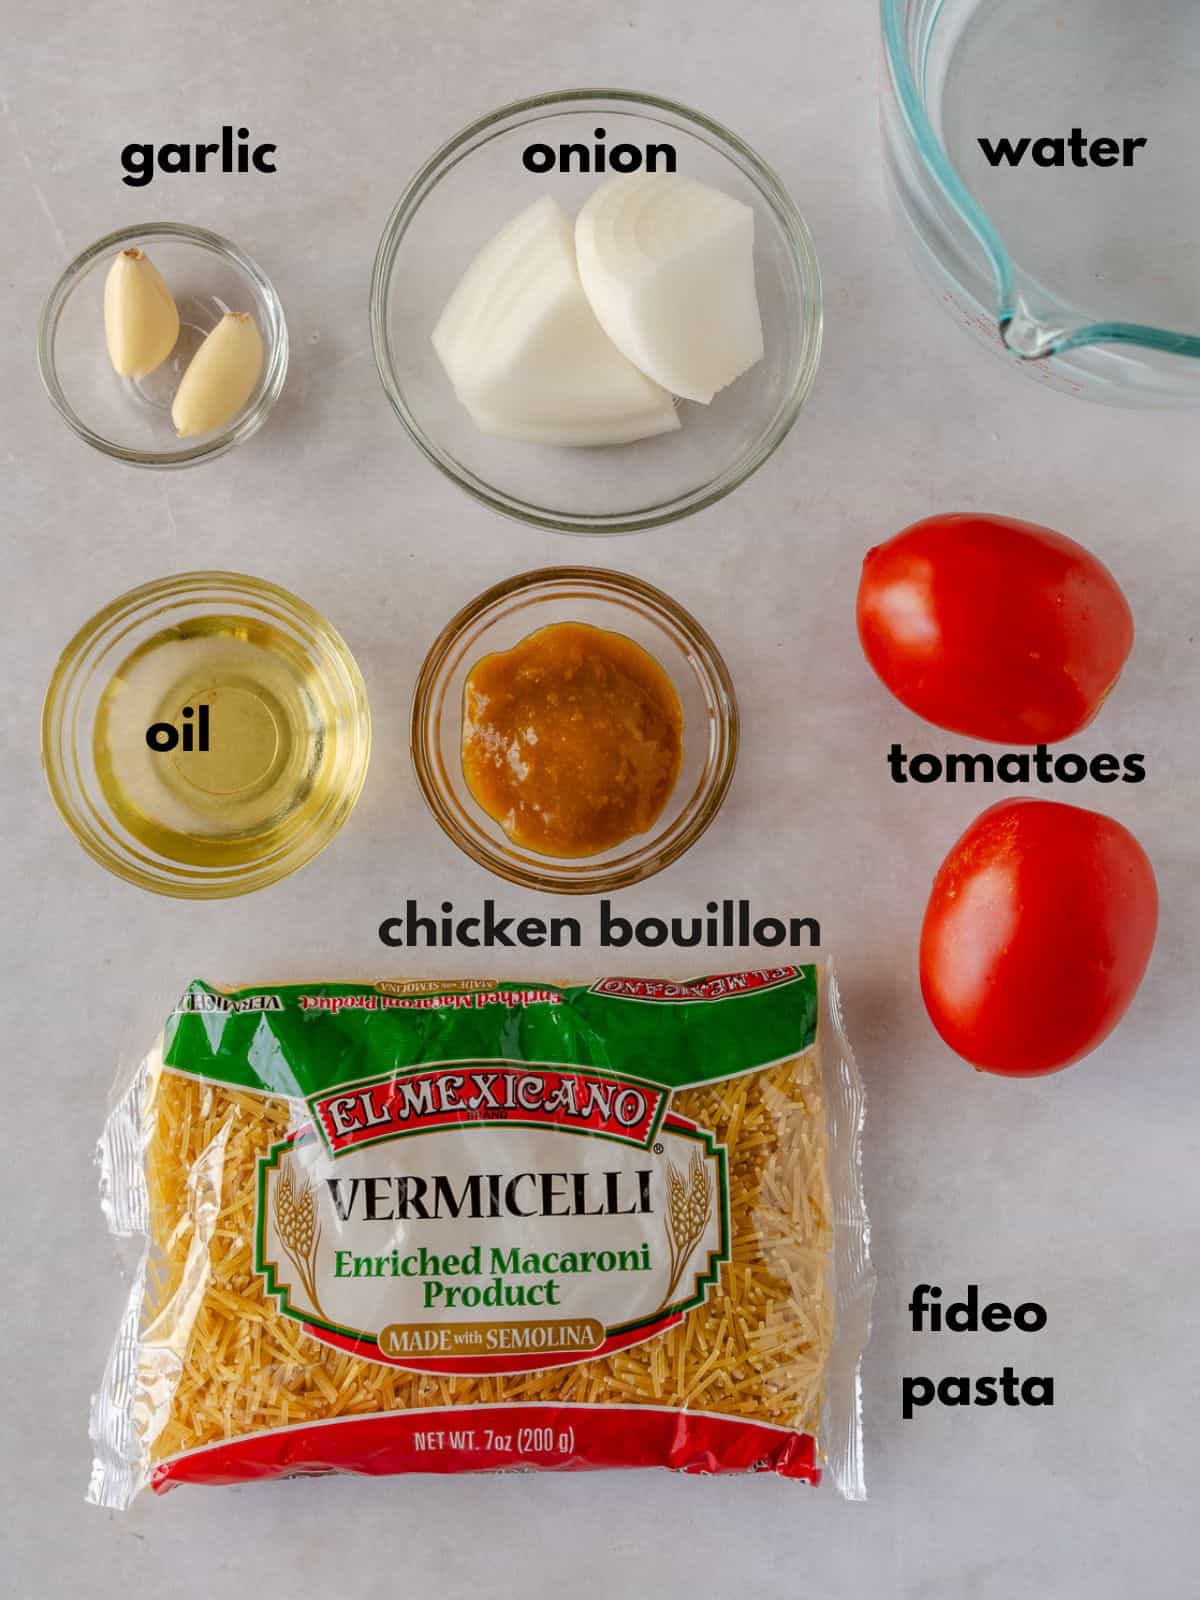 Ingredients with text, (garlic, onion, water, oil, chicken bouillon, tomatoes, fideo pasta).